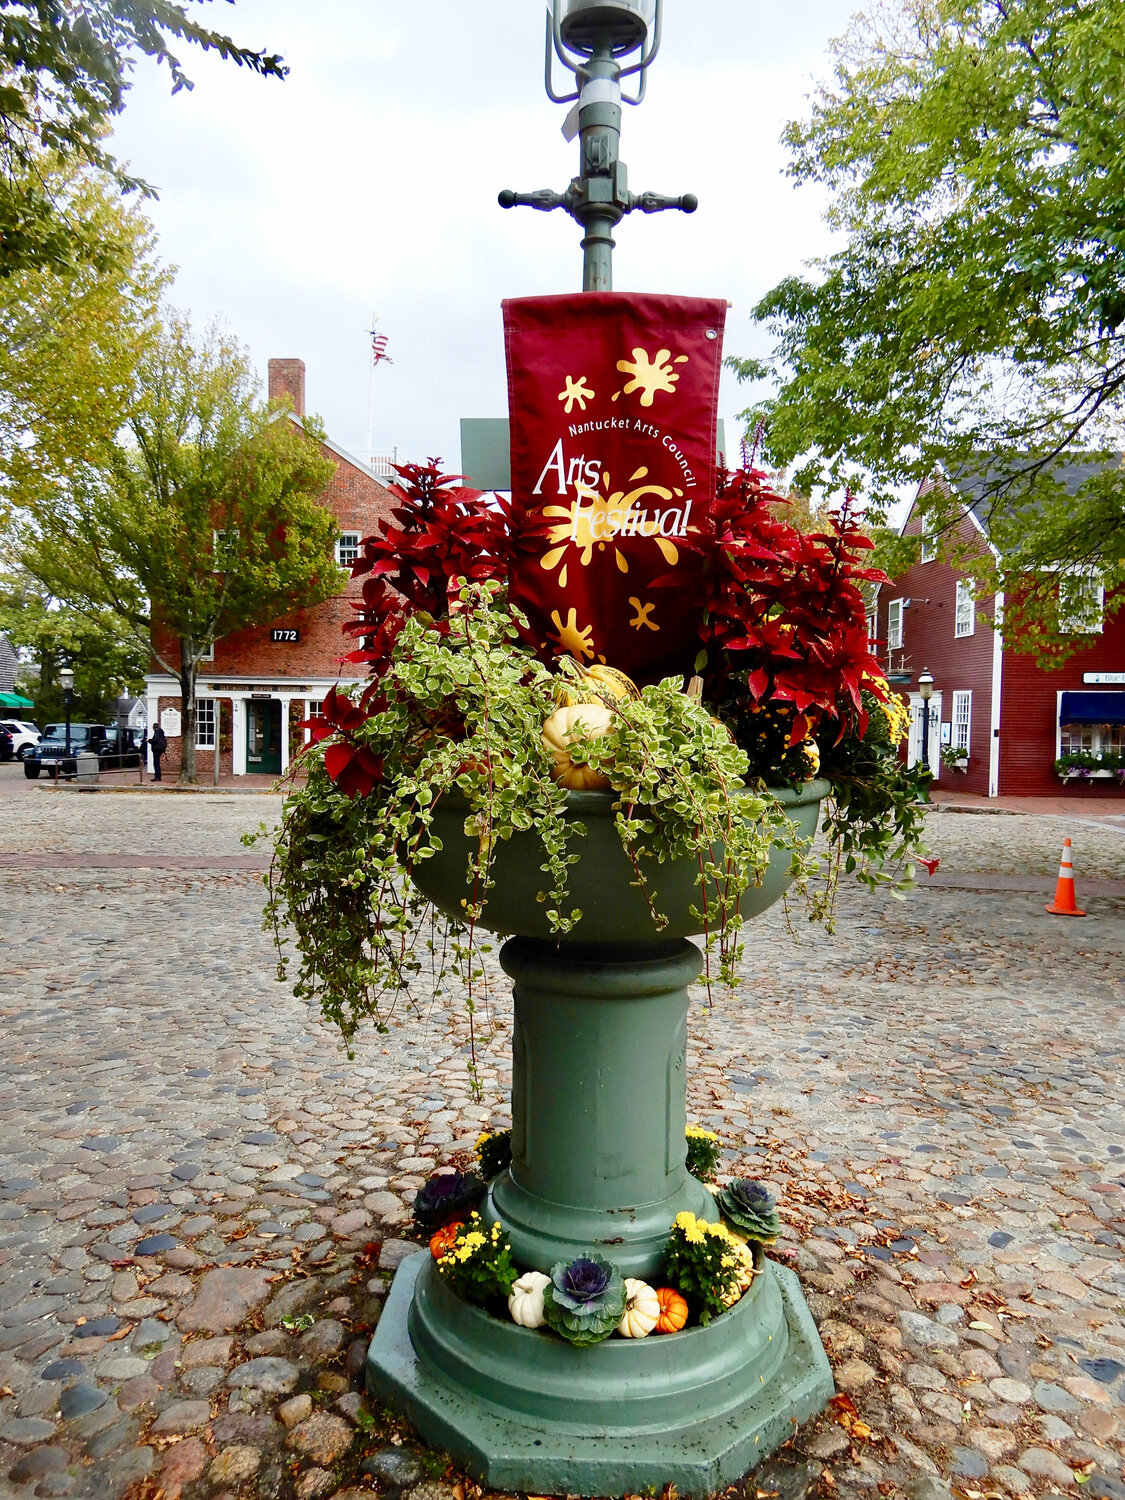 The fountain decorated for the fall 2019 arts festival.